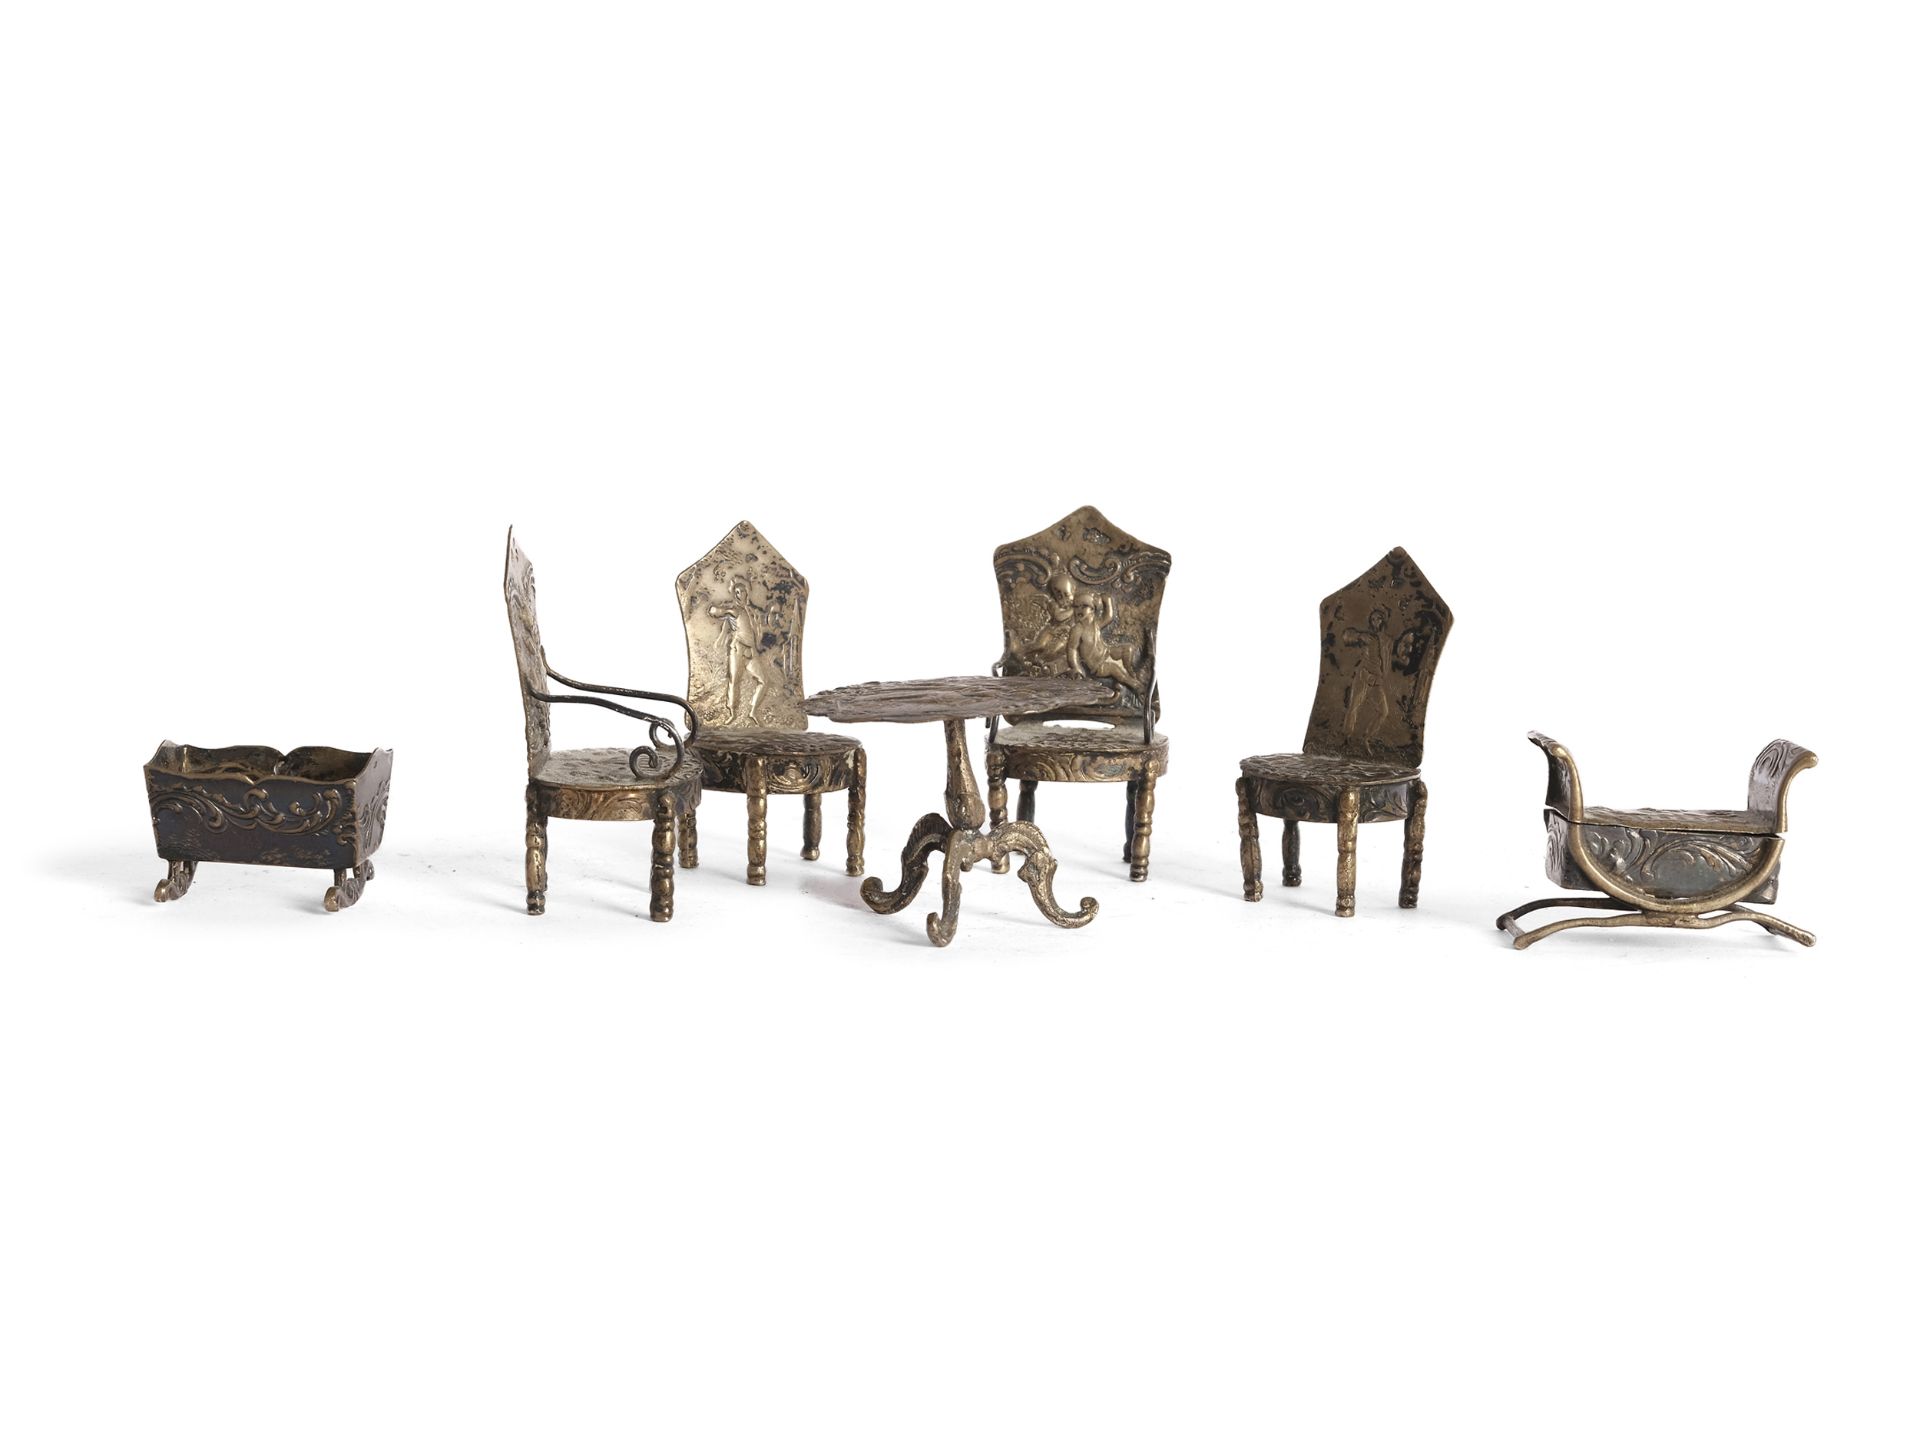 Seating set for doll's house, around 1900/20